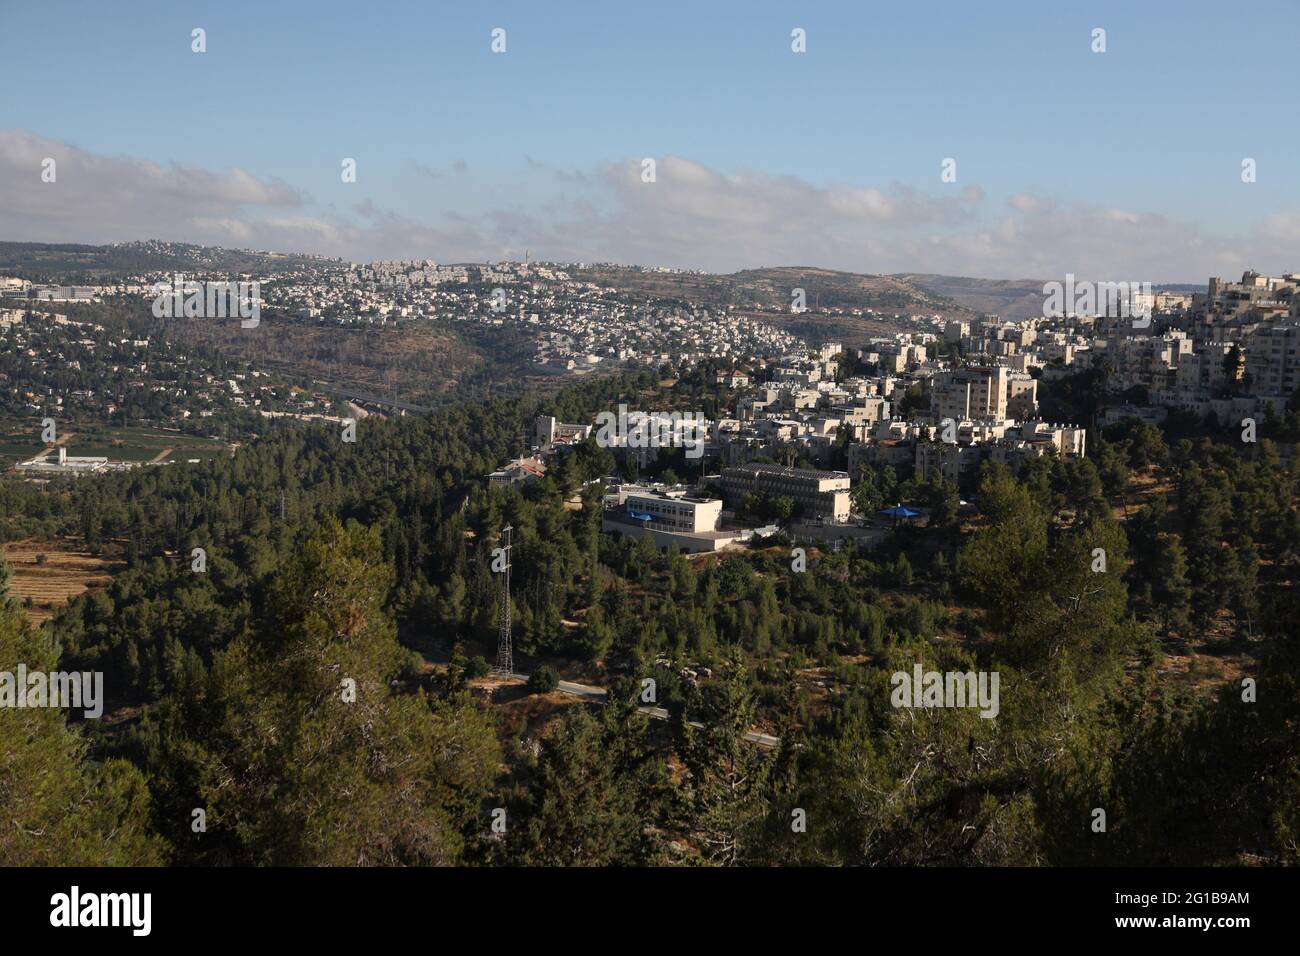 Biblical Judean Hills seen from the Jerusalem forest with Pine Trees,  Har Nof, Jerusalem neighborhood on the right, plus towns Motza & Mevaseret Zion Stock Photo